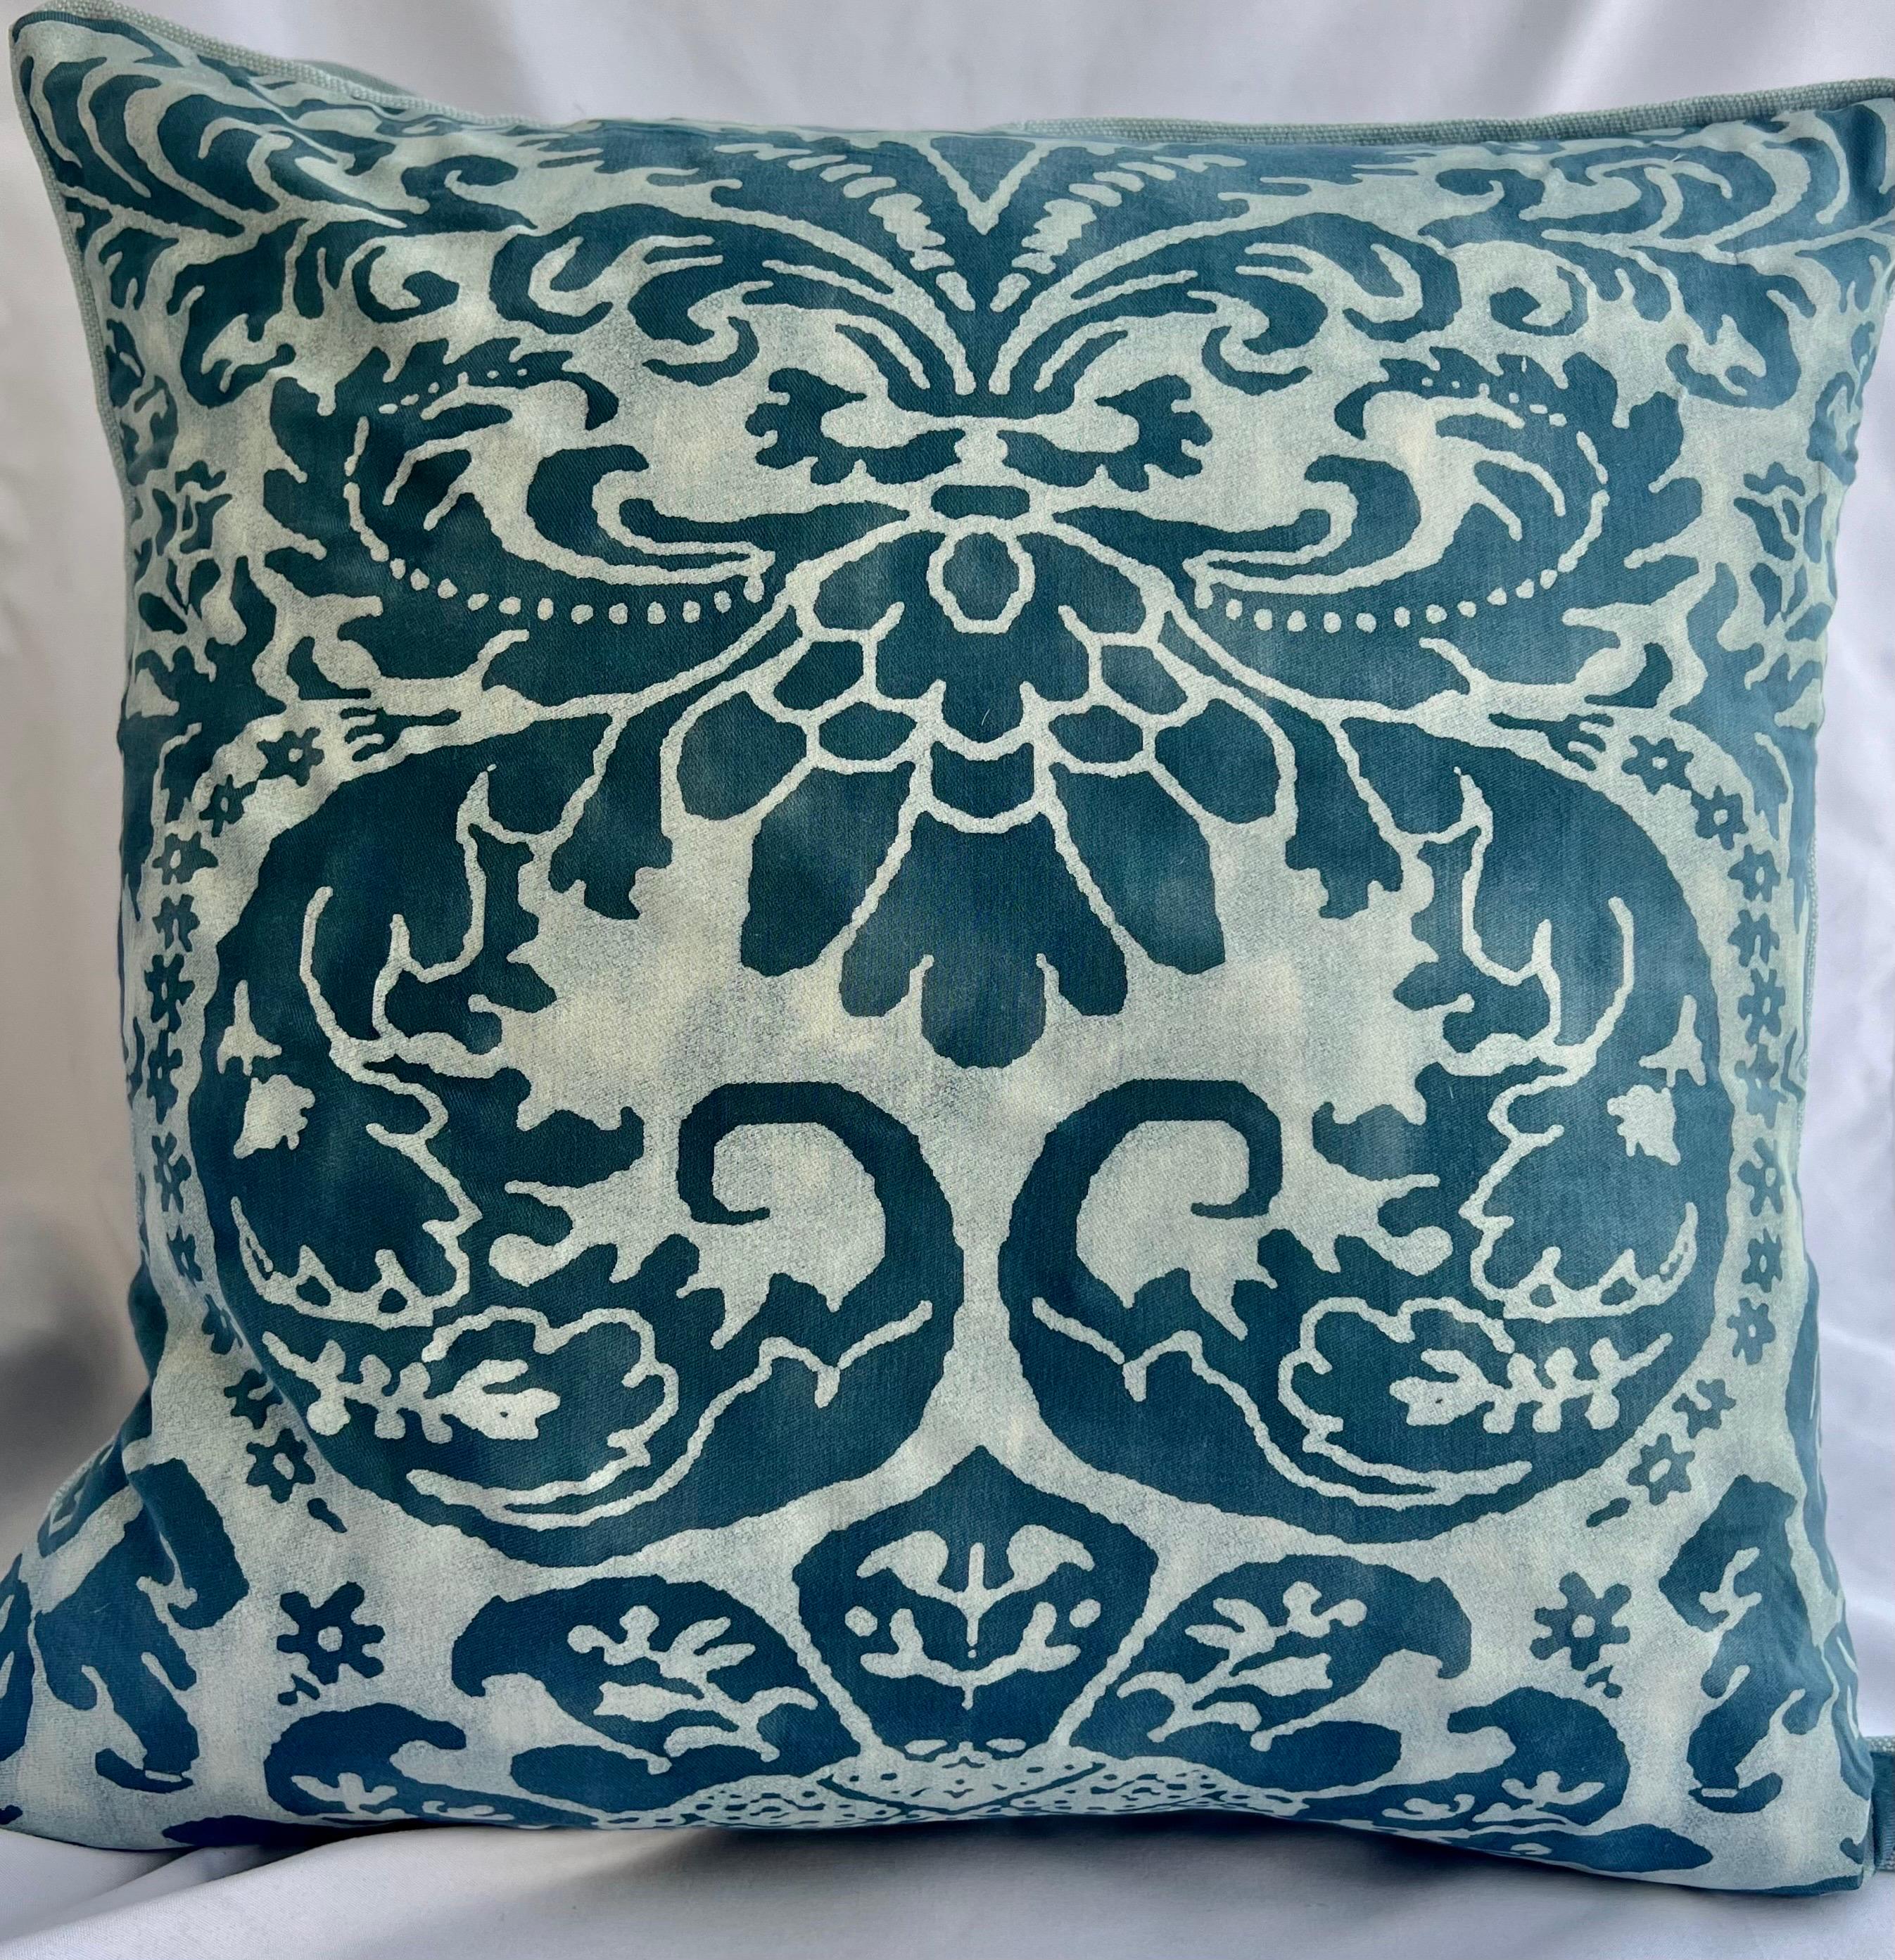 Pair of custom pillows made with blue & white tones in the Caravaggio patterned Fortuny fabric fronts and a soft blue linen style back.  Down filled inserts, zipper closures.